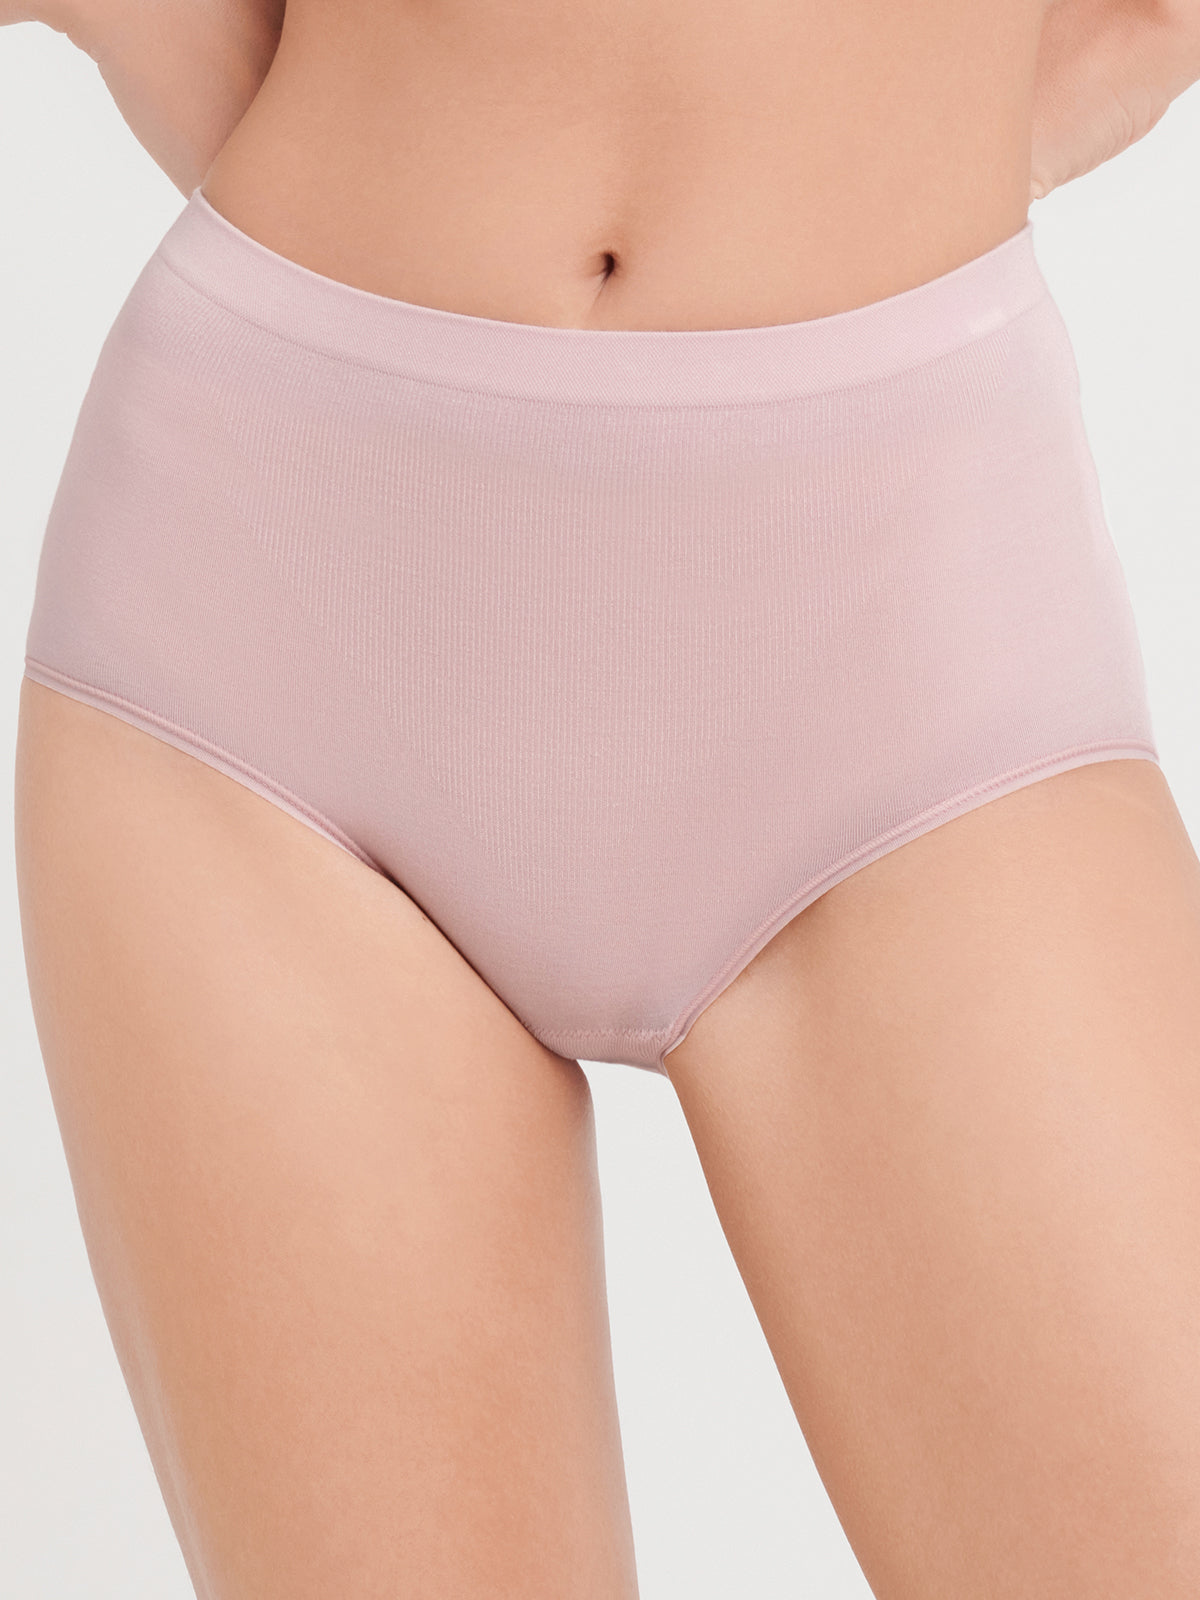 Seamless Period Brief Kit of 2